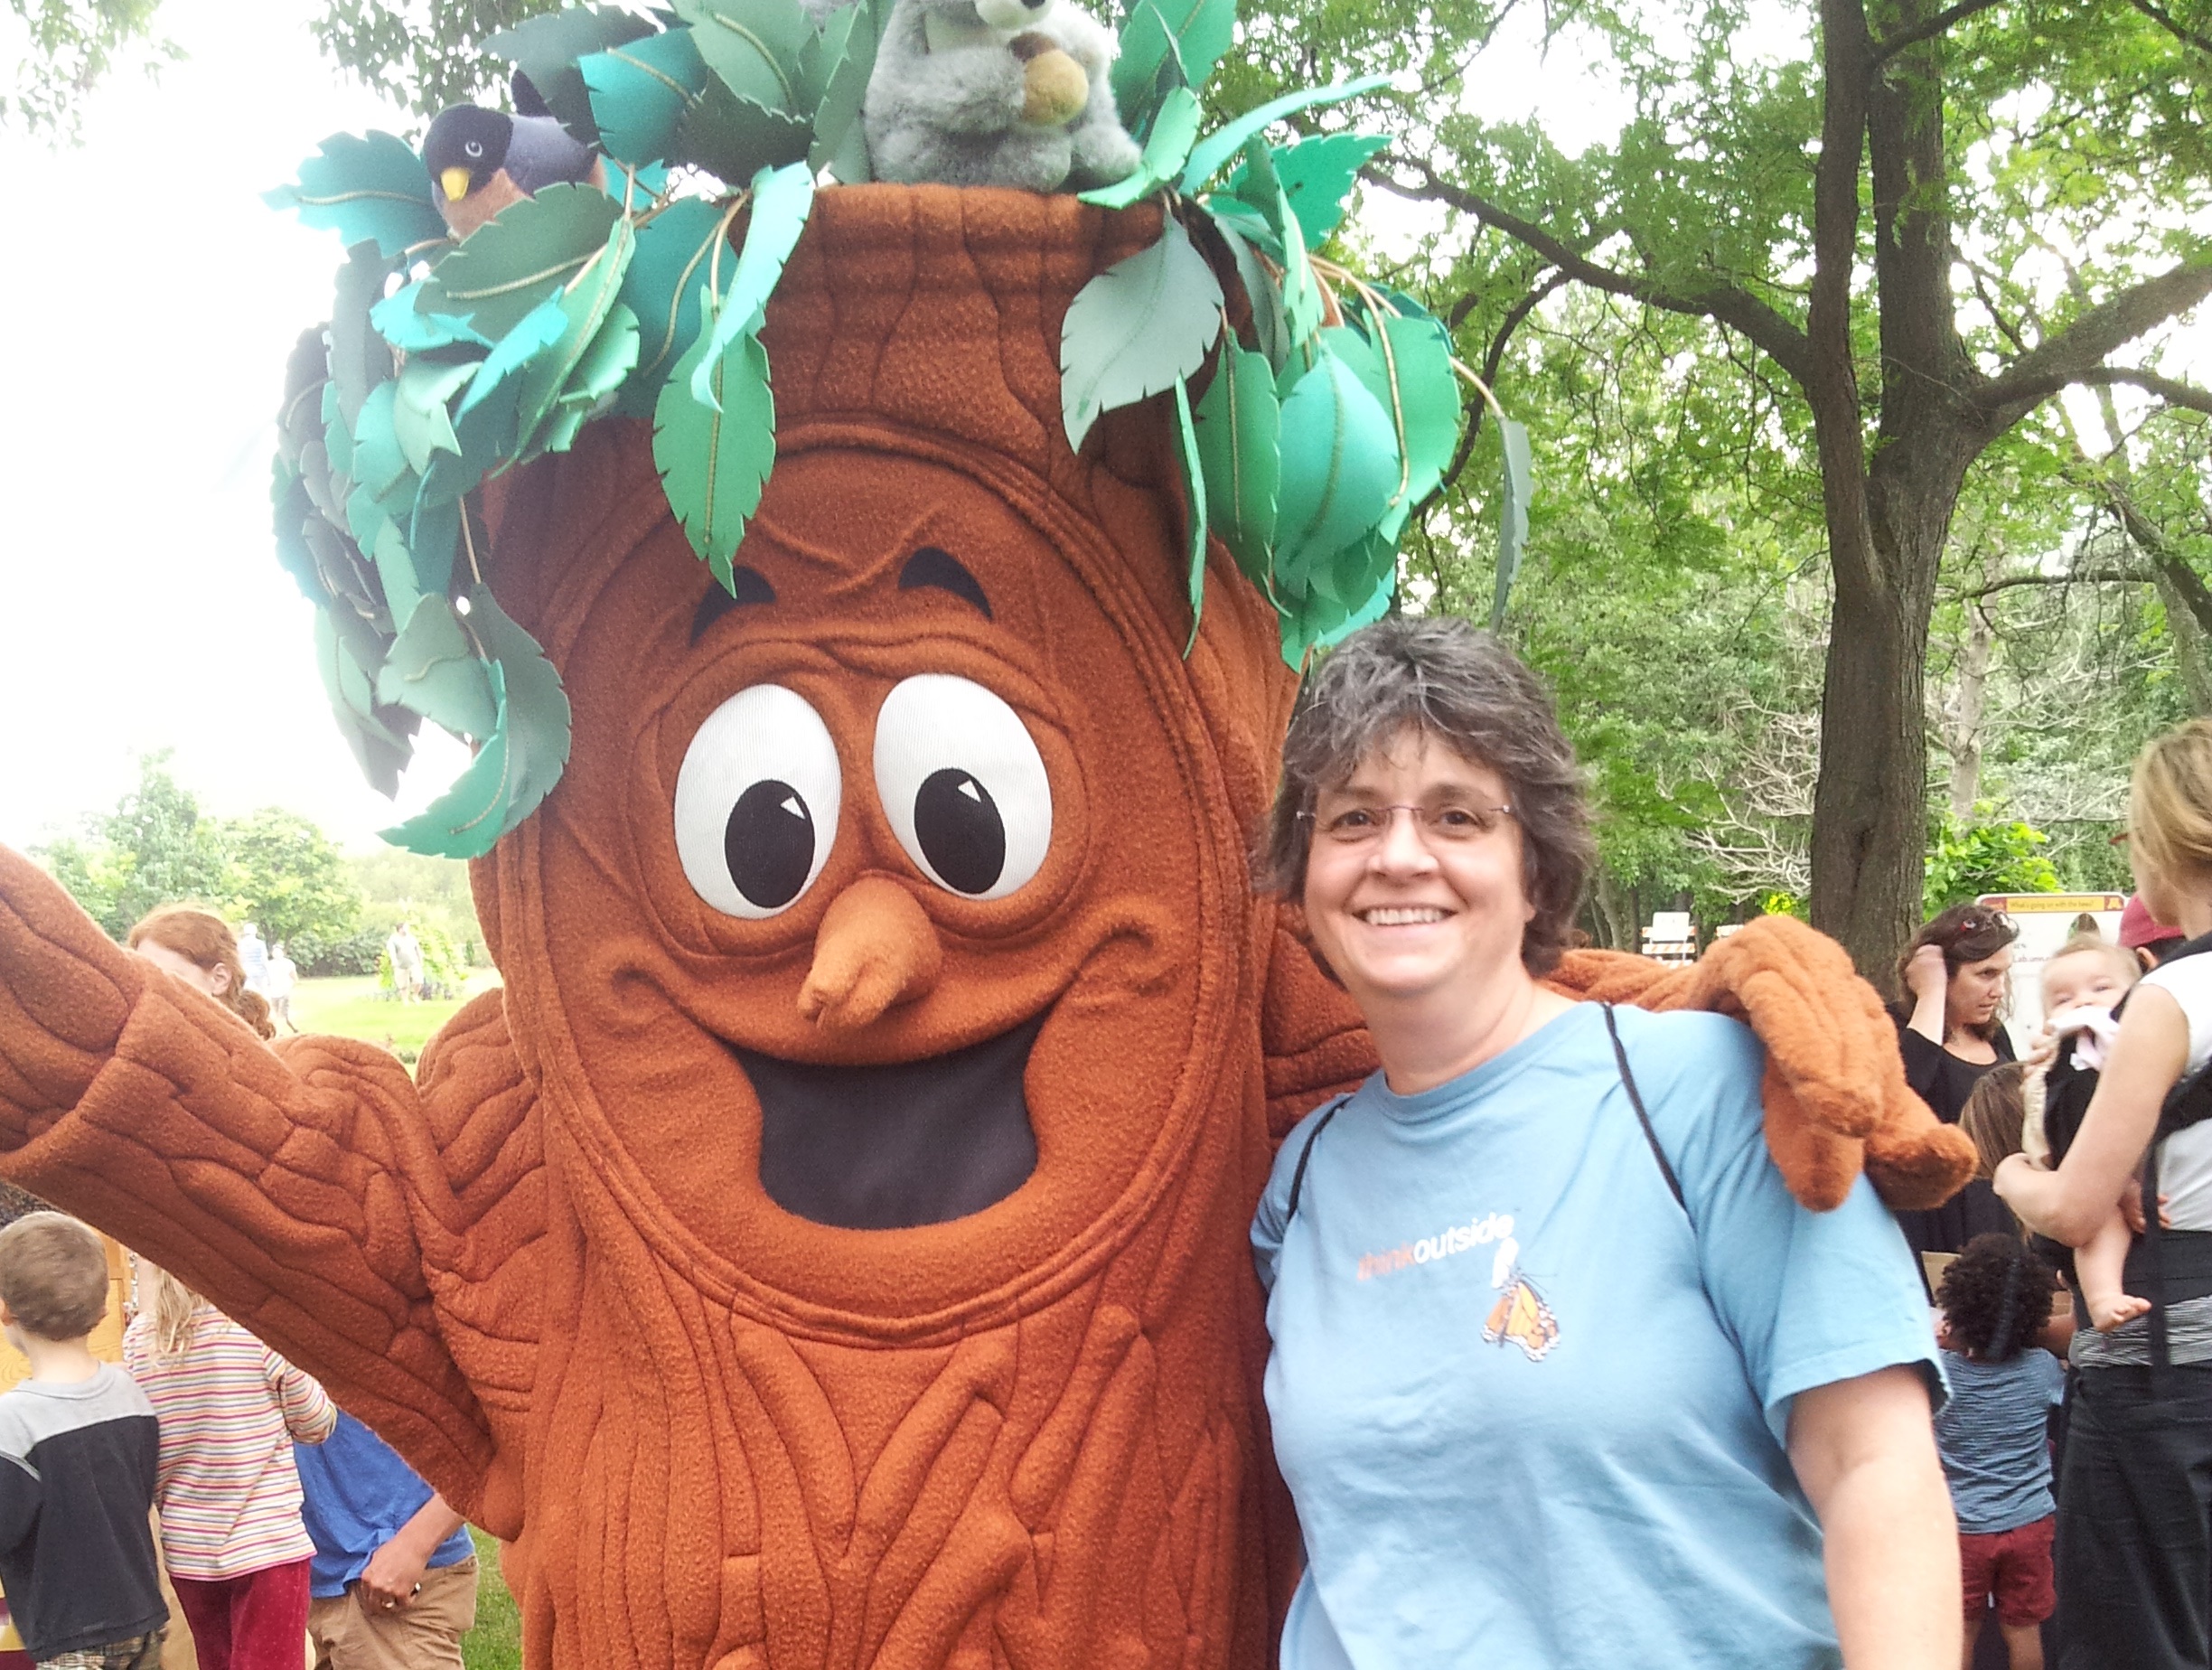 Michelle Kalantari poses with a person dressed in a tree costume.